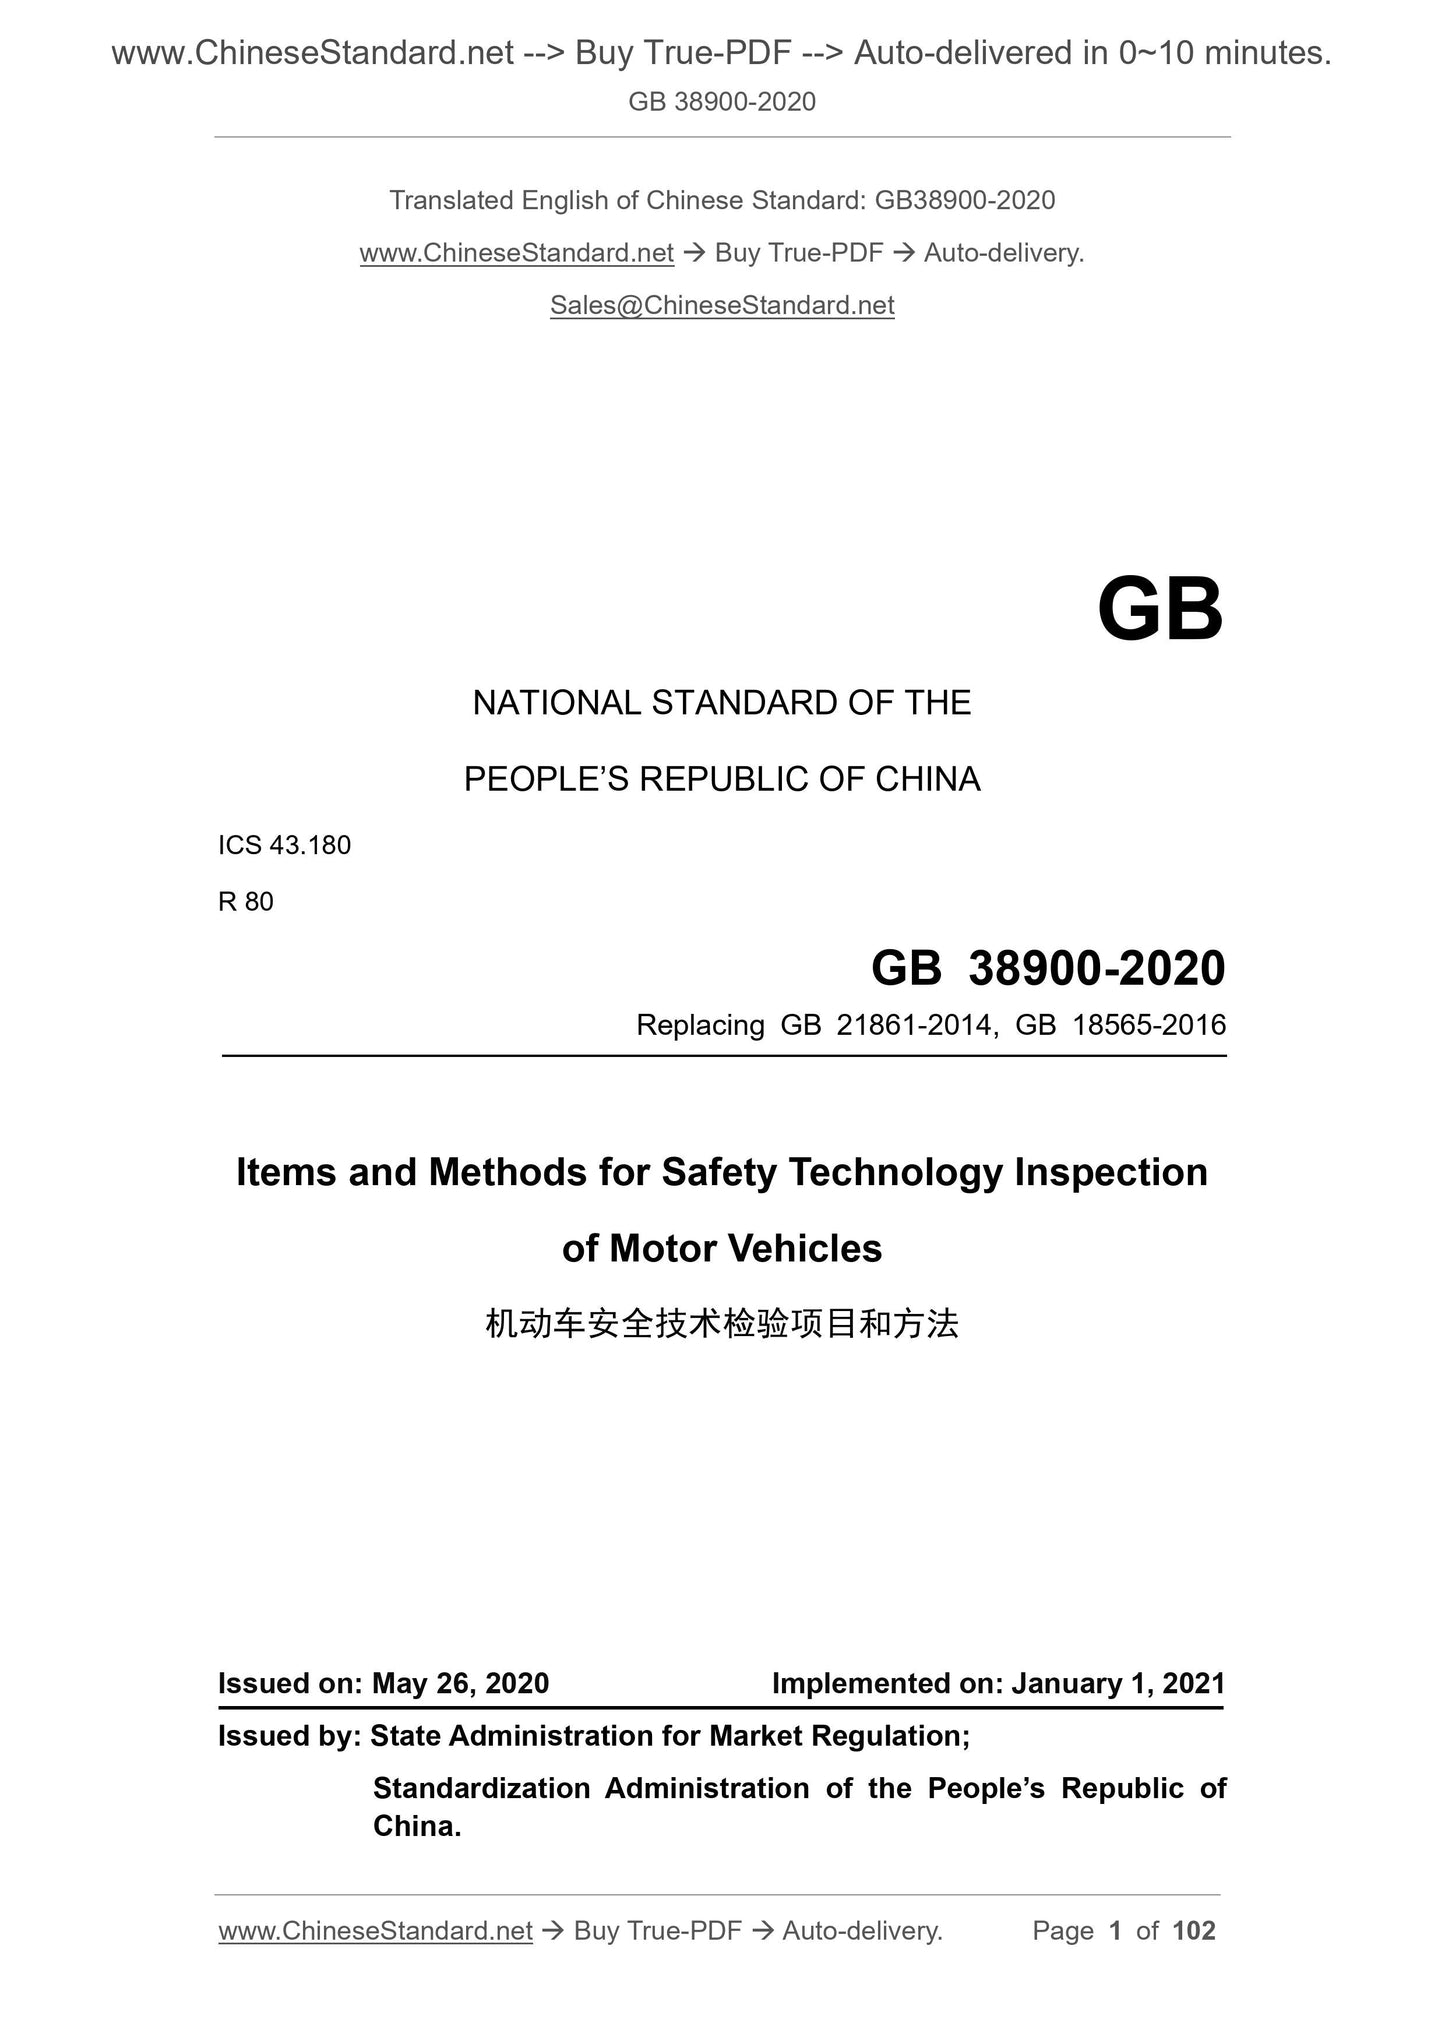 GB 38900-2020 Page 1